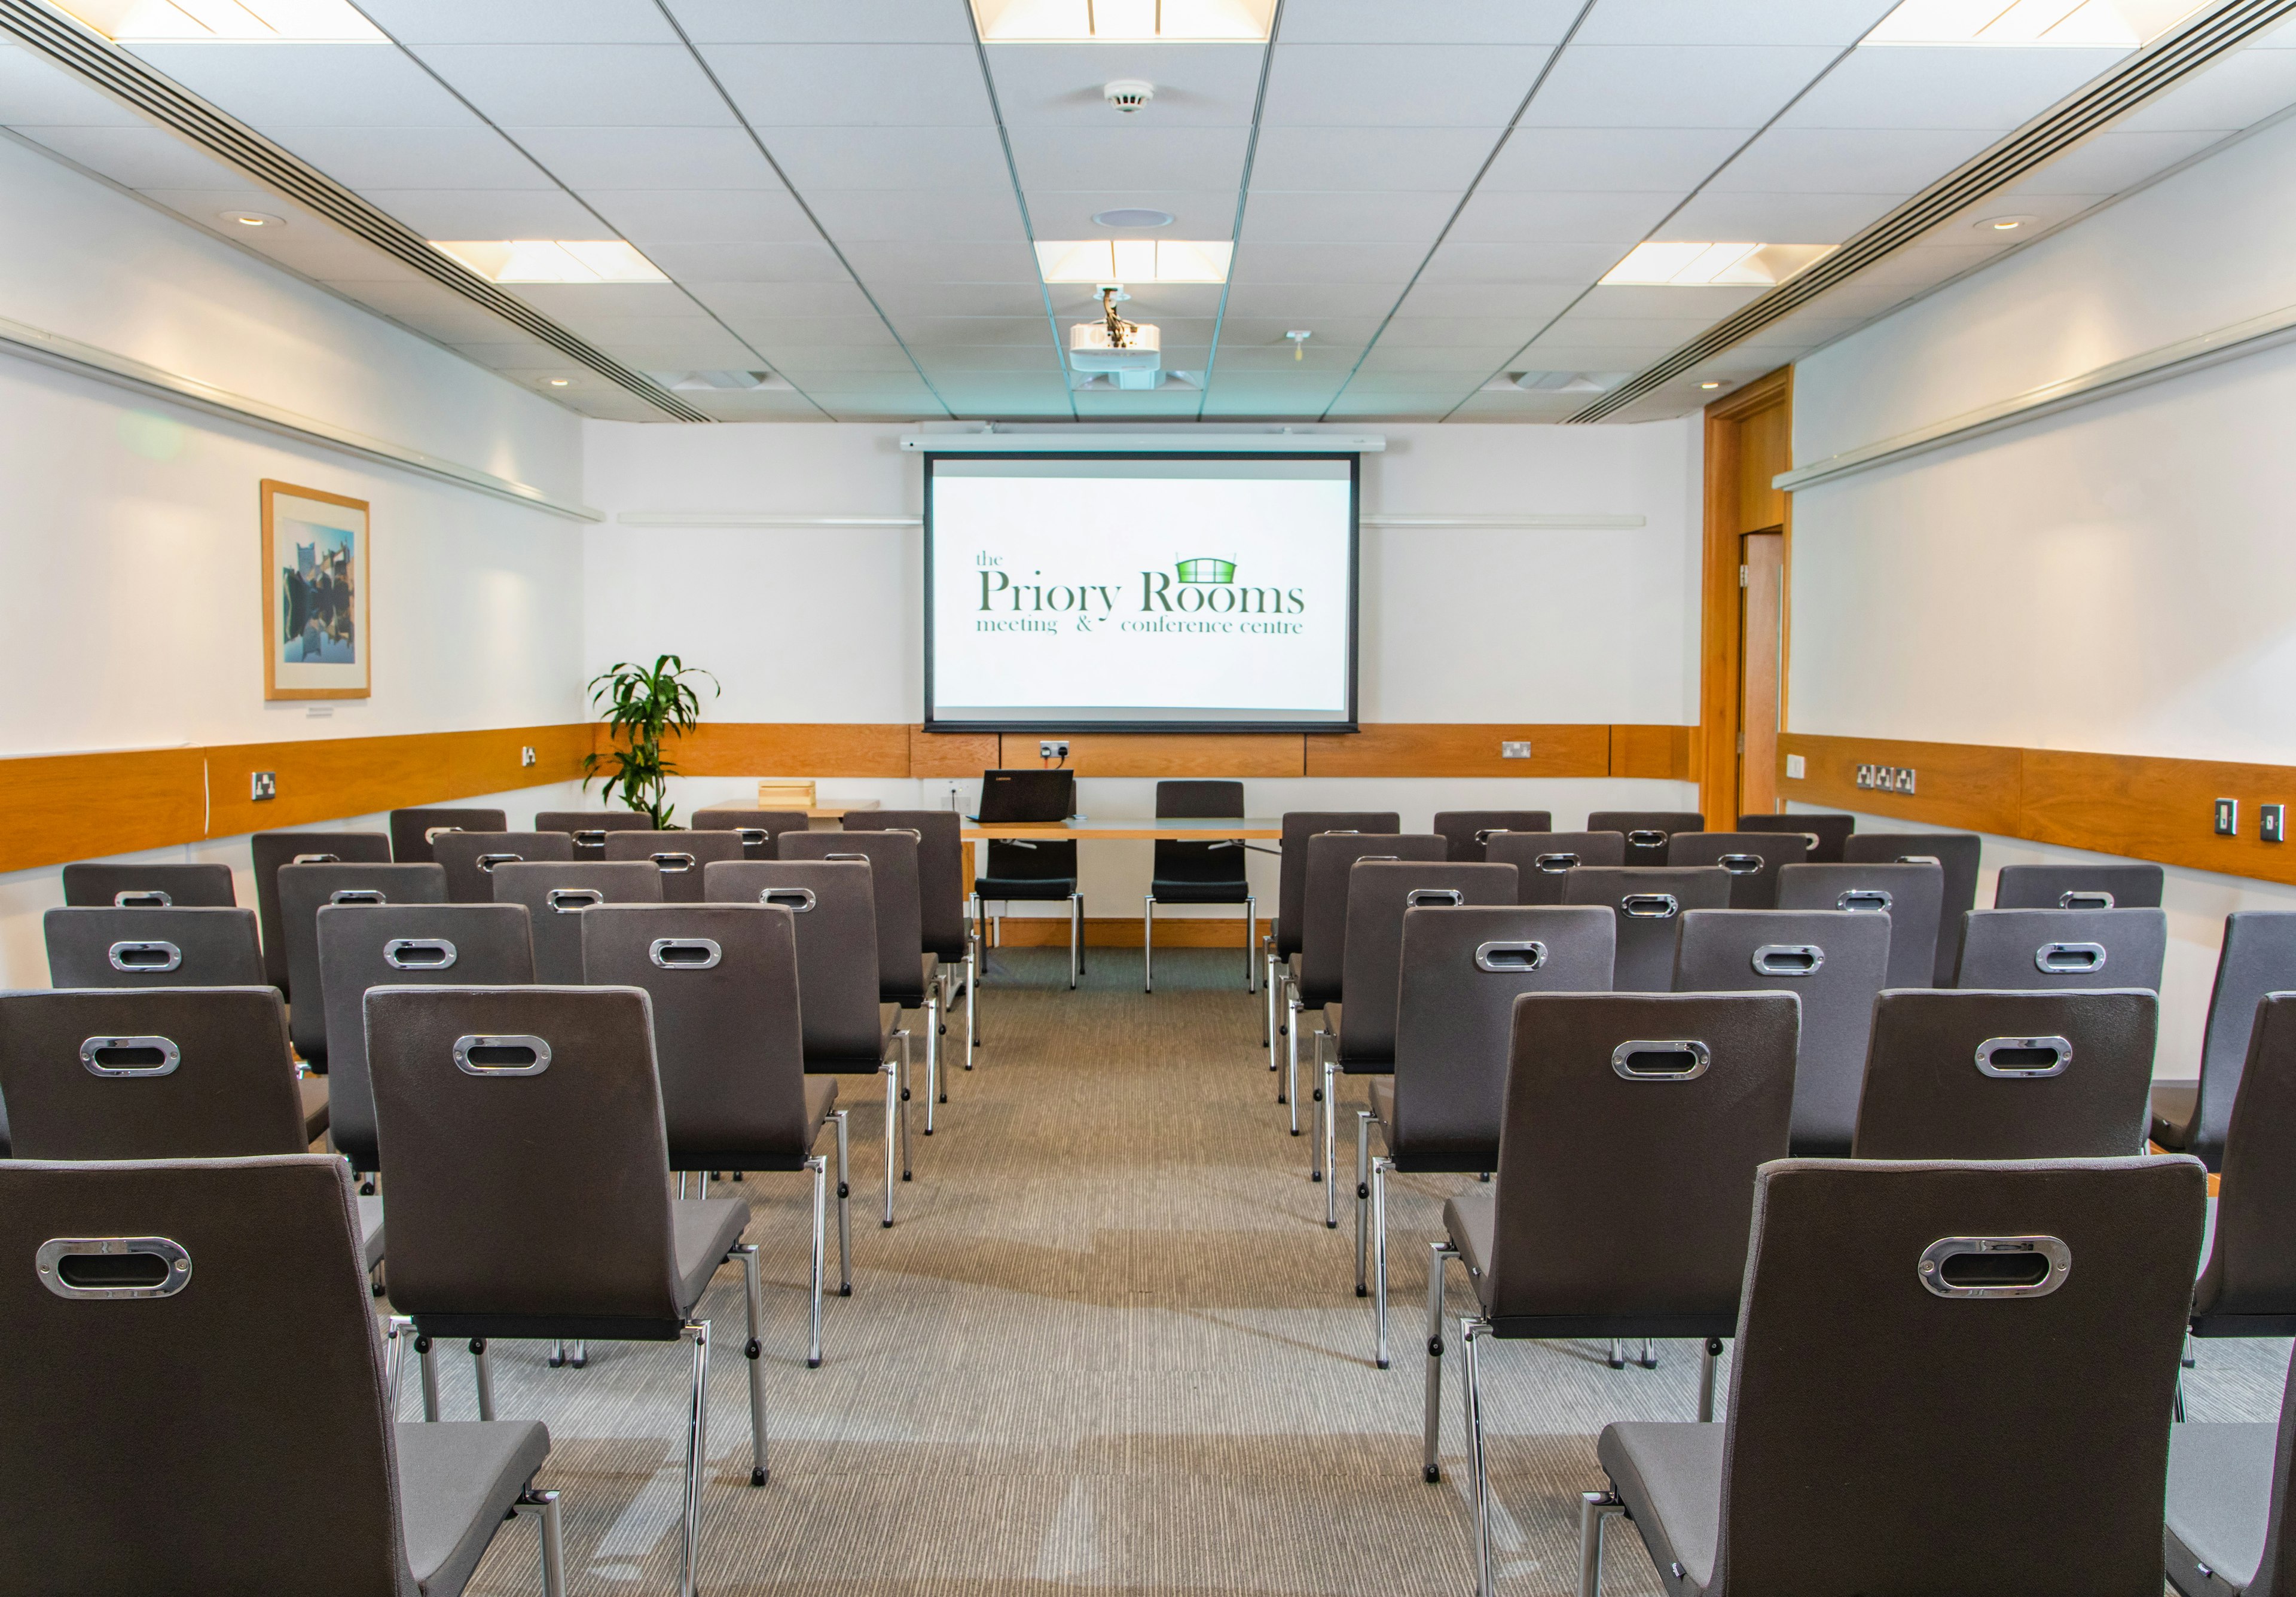 Business - The Priory Rooms Meeting and Conference Centre 